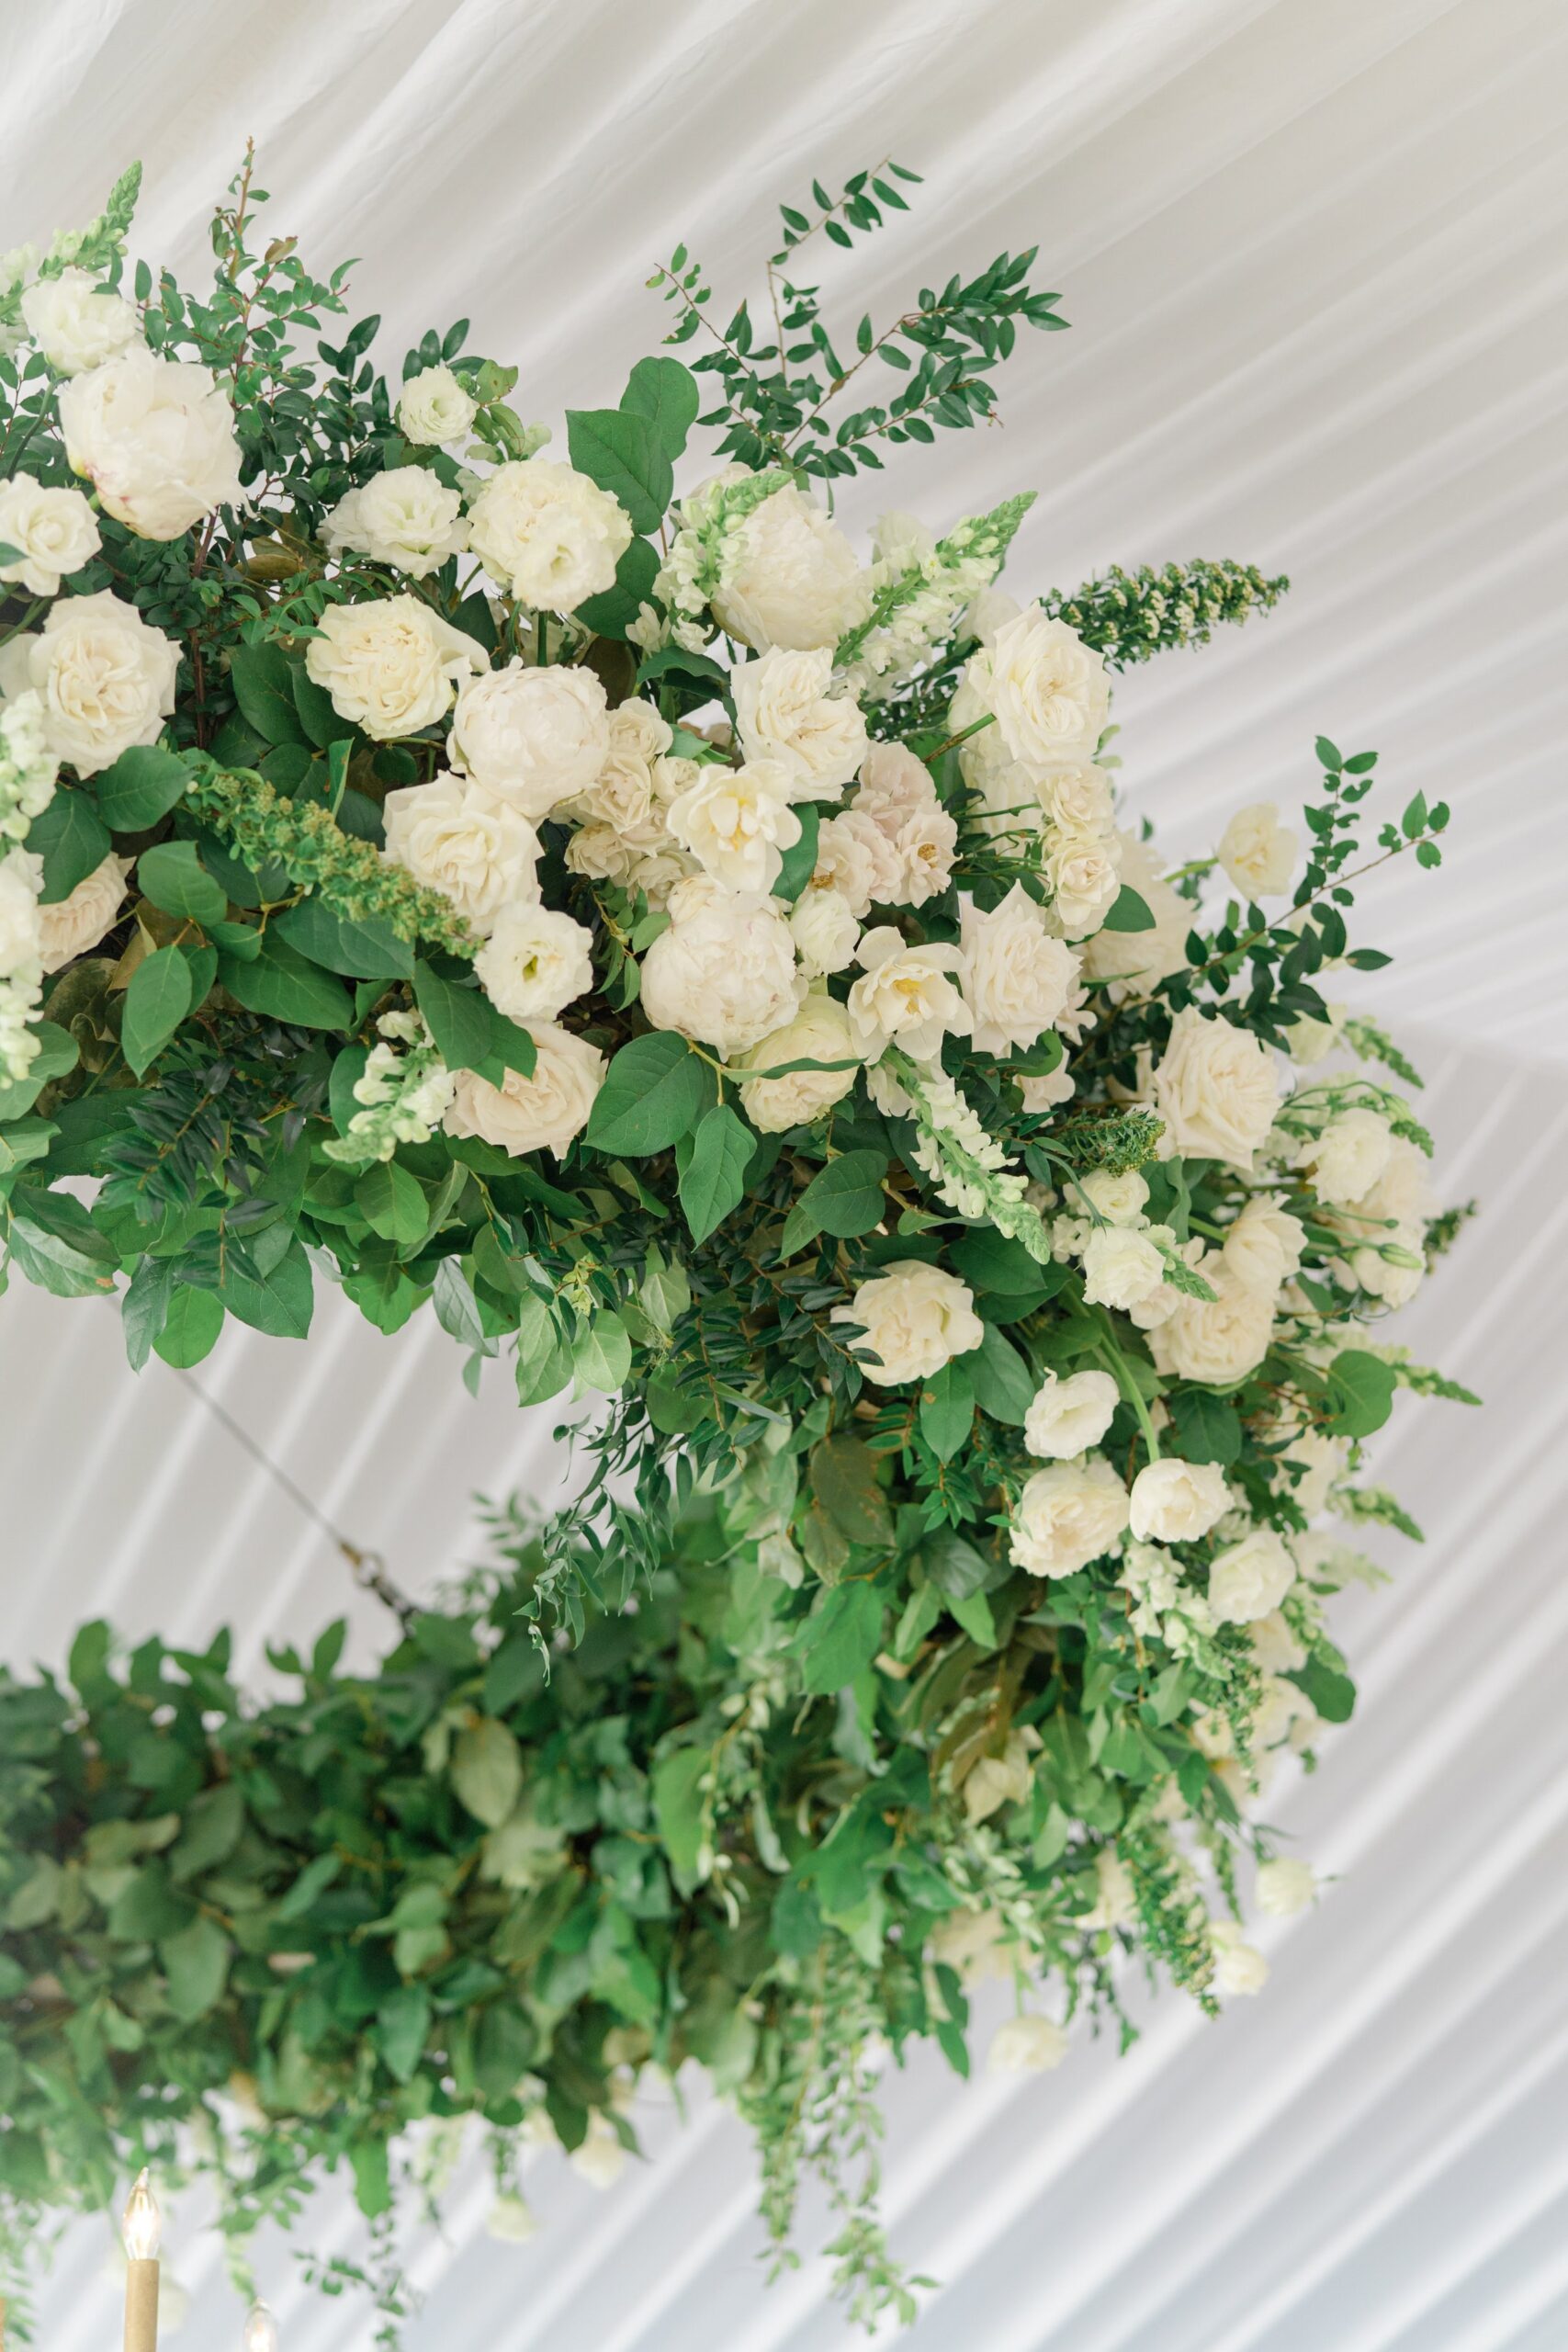 Hanging white flowers and greenery wedding reception installation.